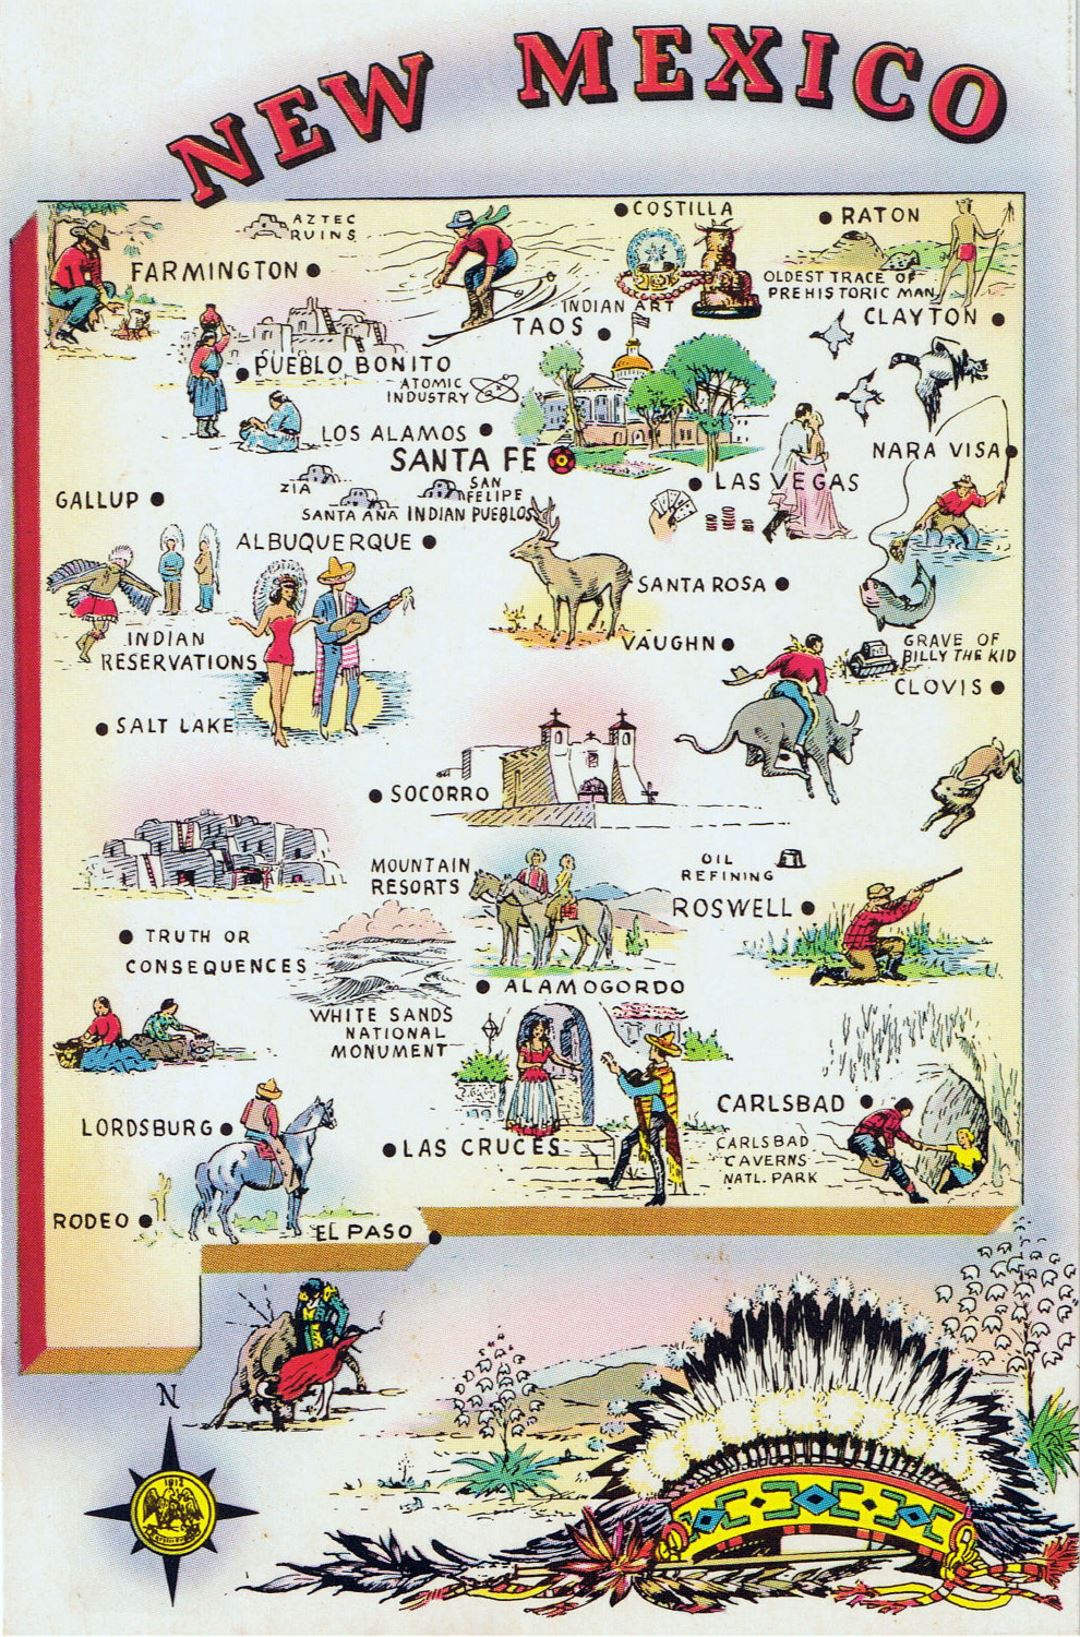 Detailed tourist illustrated map of New Mexico state